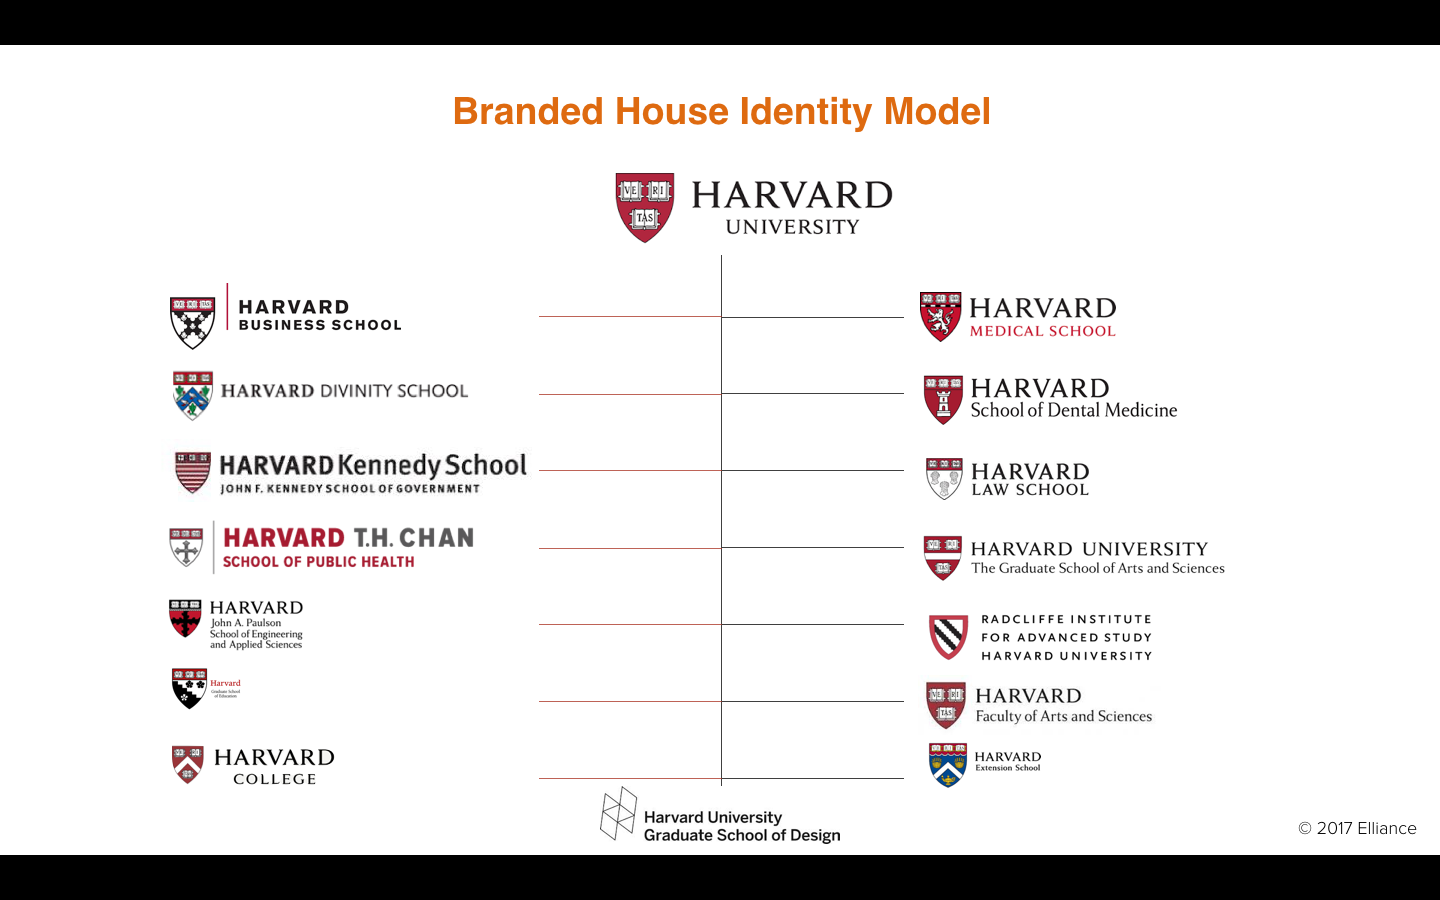 Branded House Brand Architecture for colleges and universities